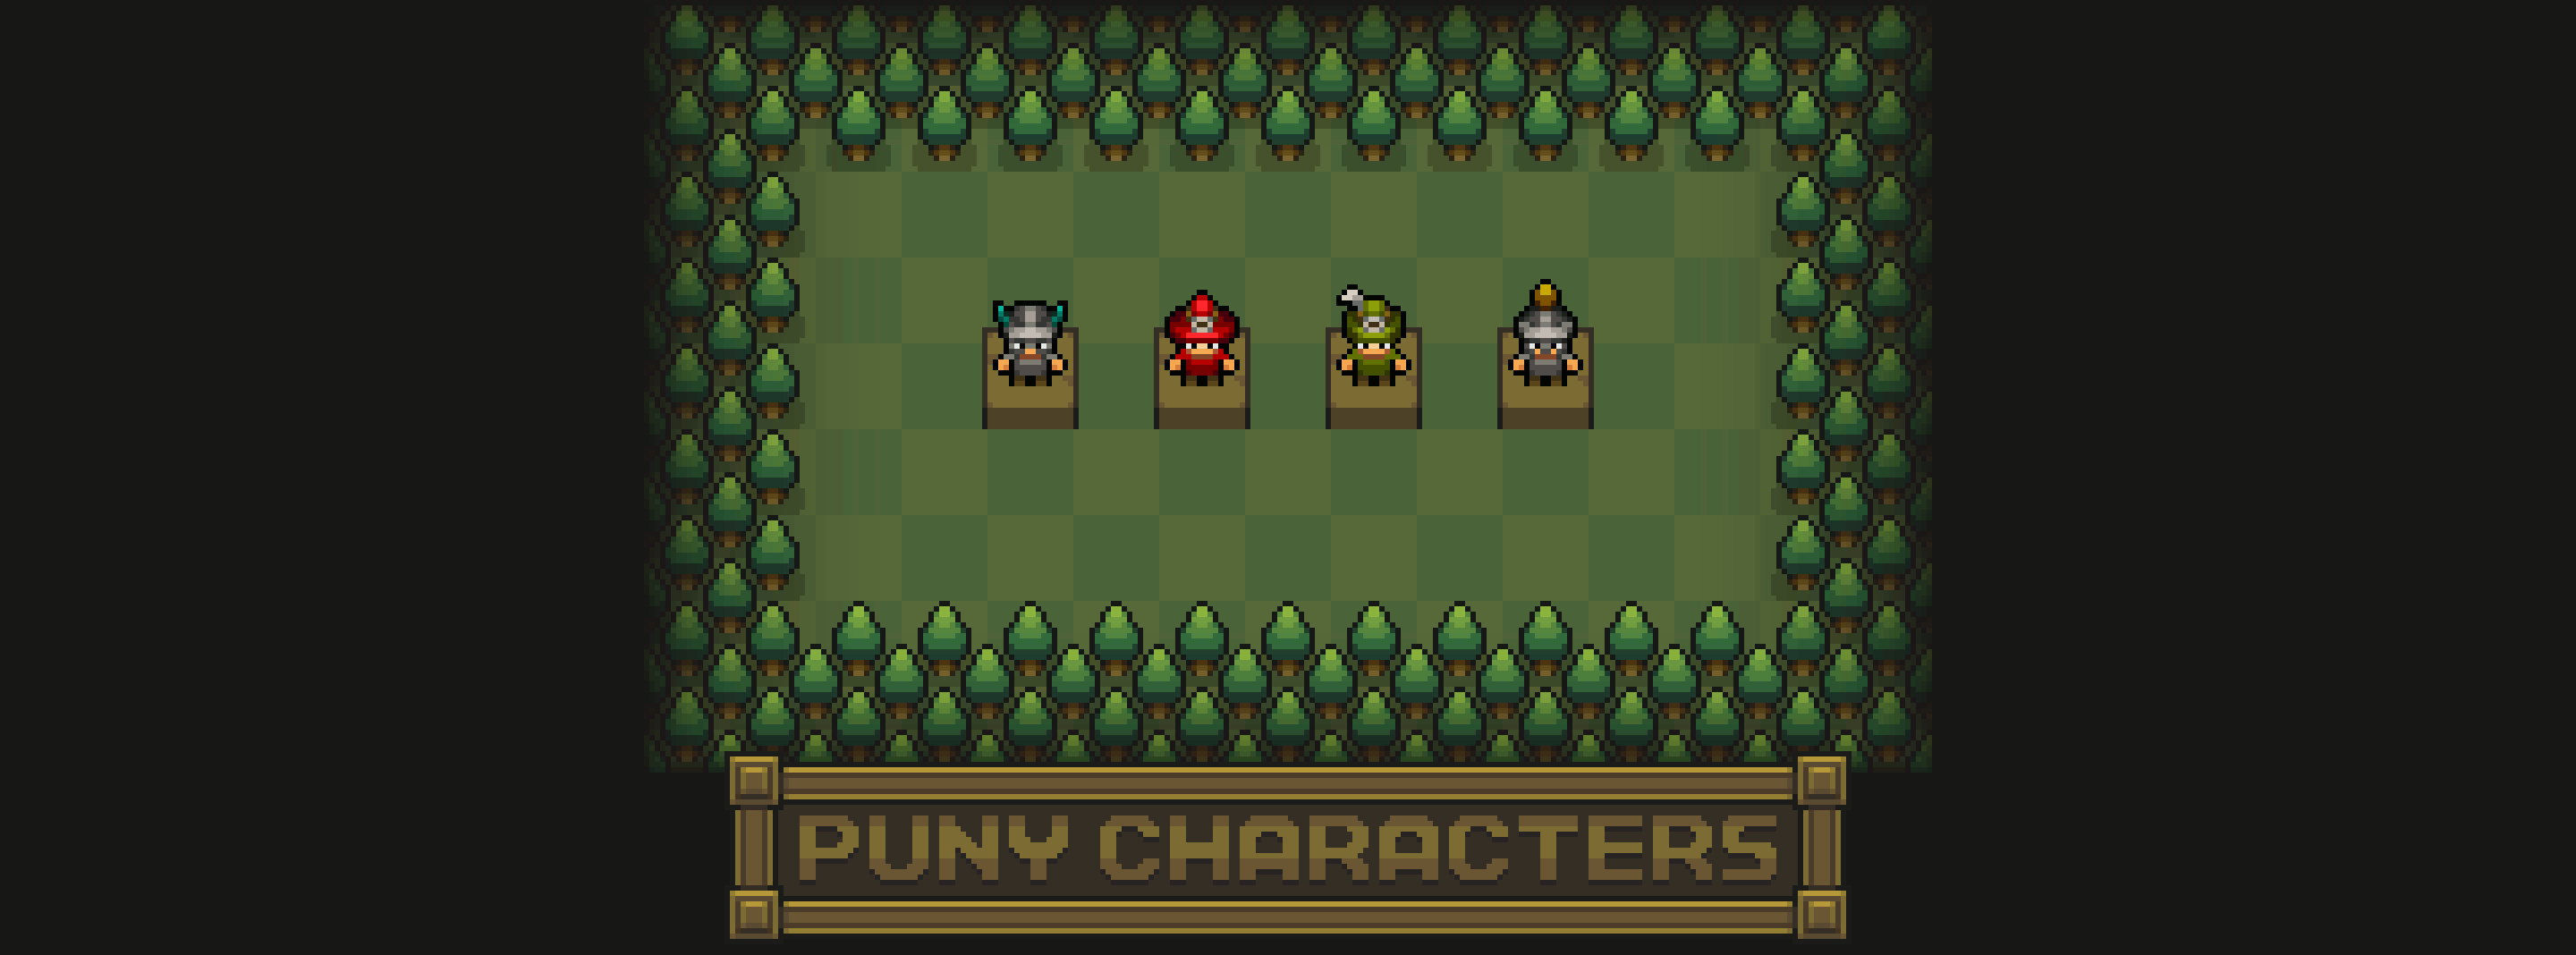 Free 16x16 Puny Character Sprites